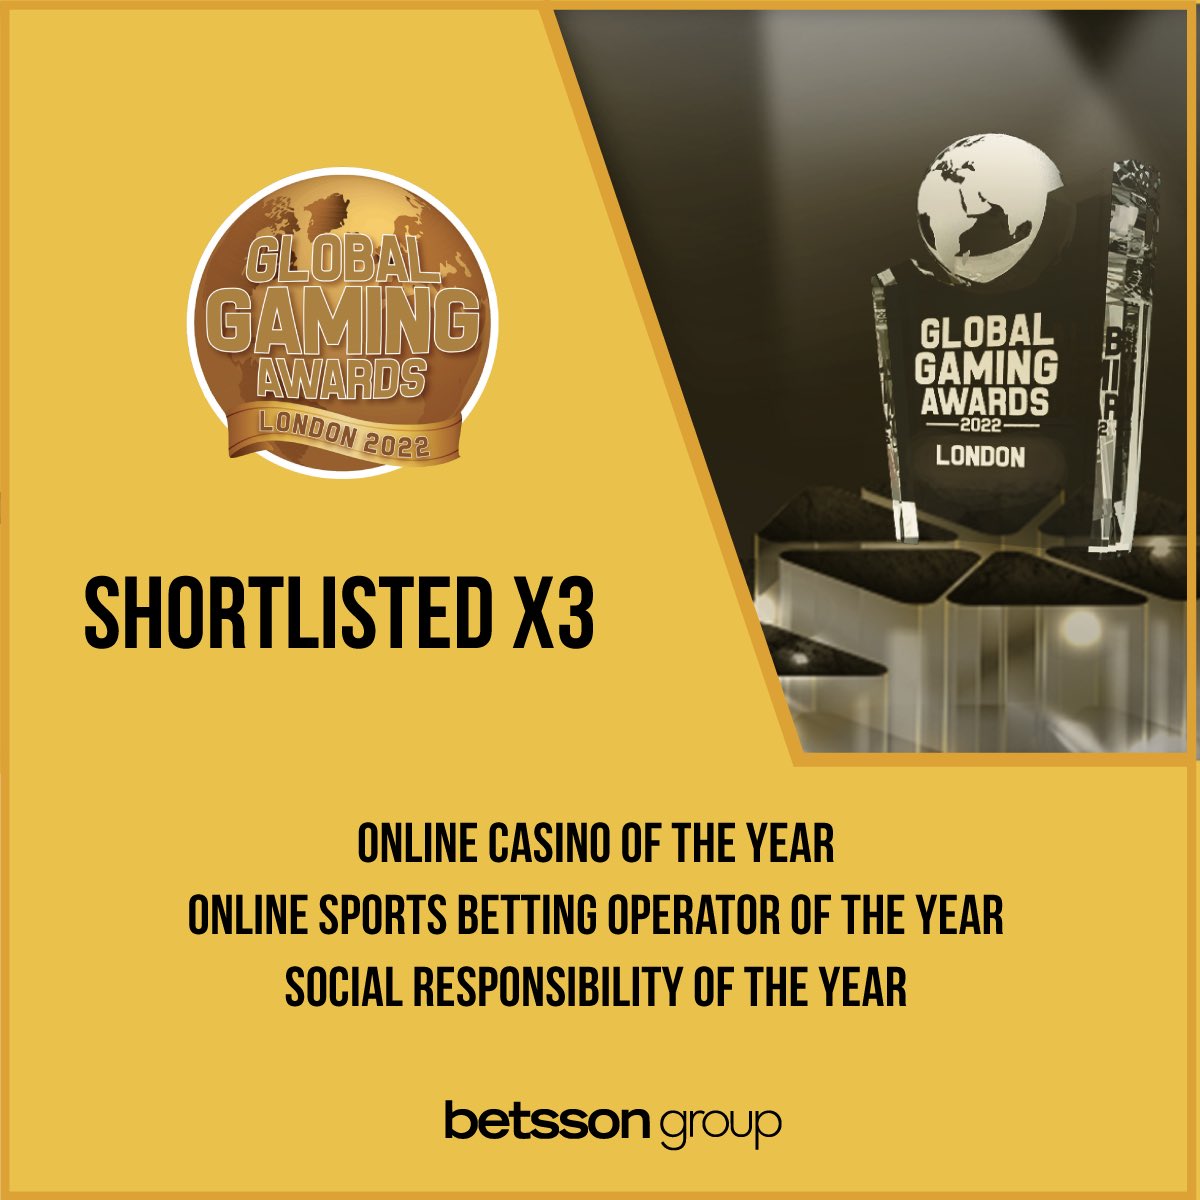 We're proud that we’re shortlisted for 3 awards at the @GGAwrds 2022 in London.

Betsson Group is shortlisted for:
🏆Online Casino of the Year
🏆Online Sports Betting Operator of the Year
🏆Socially Responsible Operator of the Year

Wish us luck on April 11th in London! https://t.co/wcAFXoR0m9